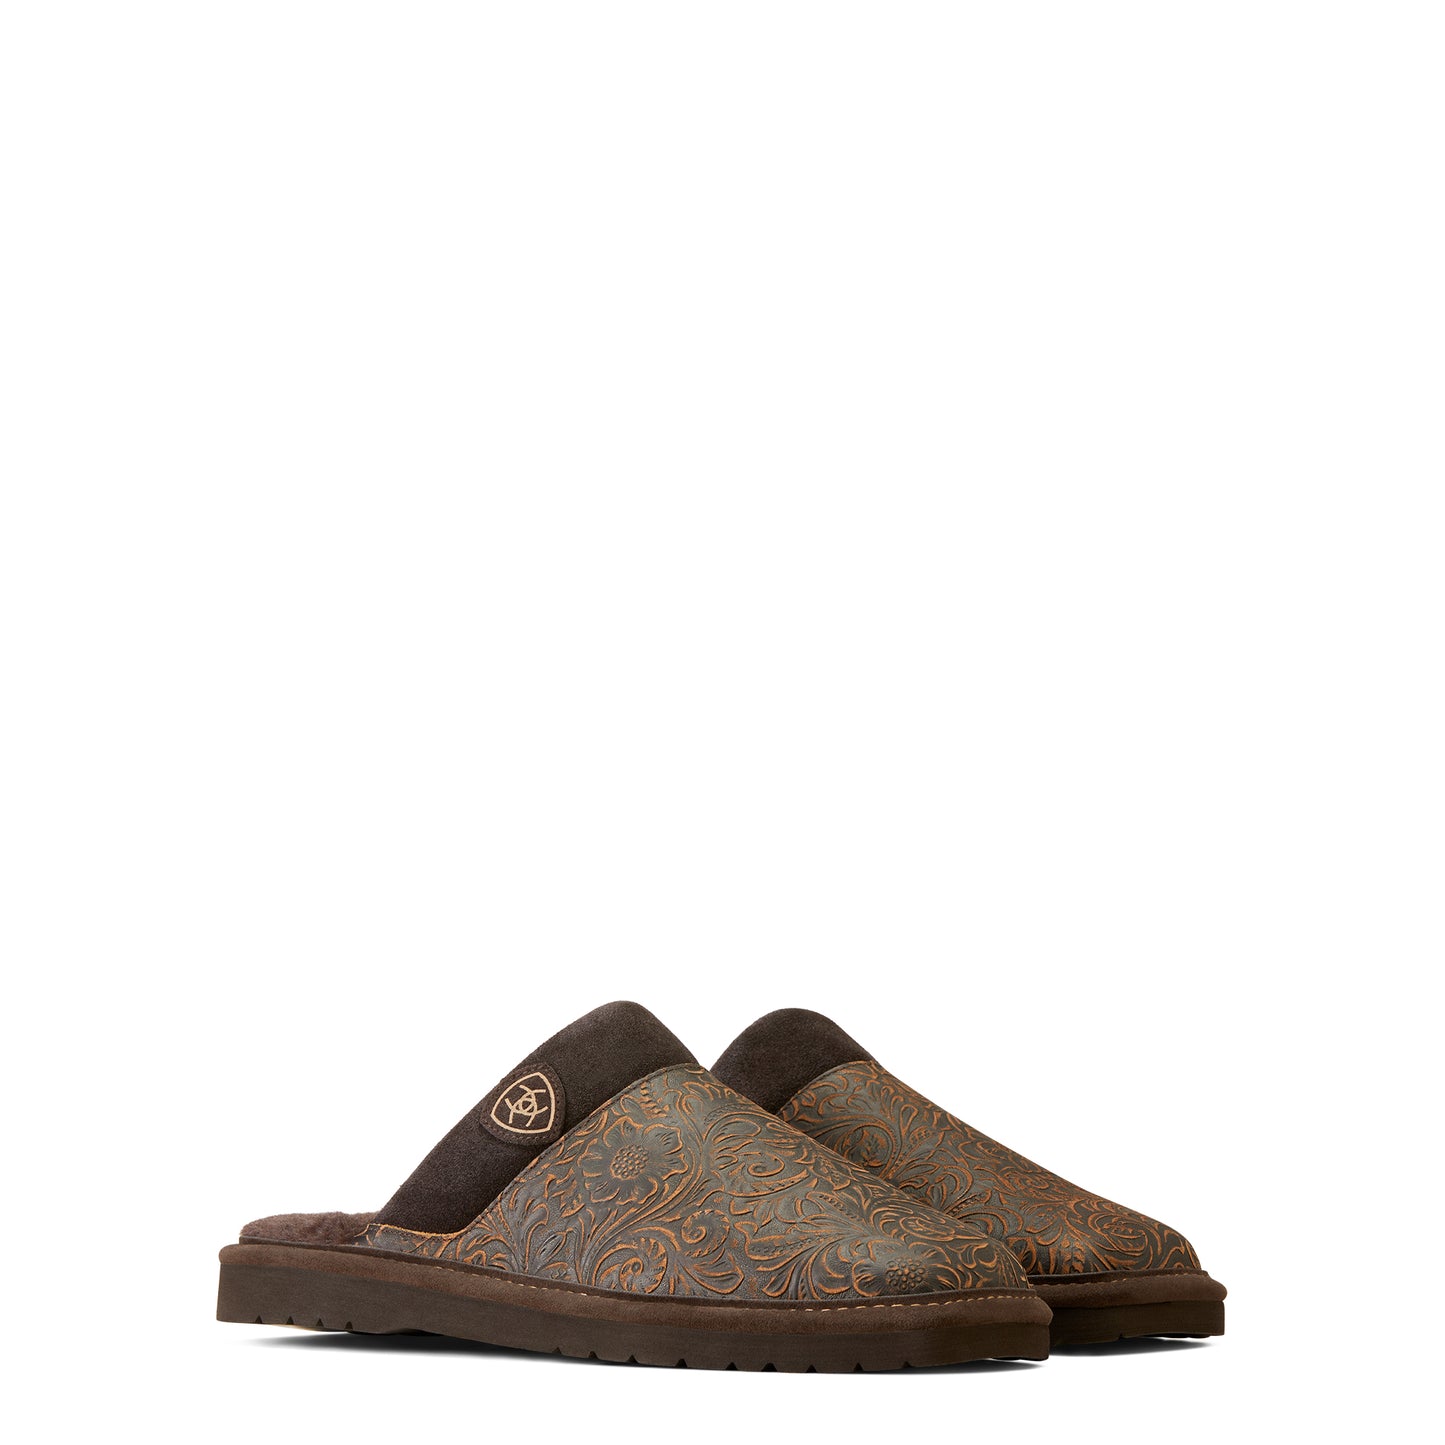 Men's Ariat Silversmith Square Toe Slippers - Brown Embossed